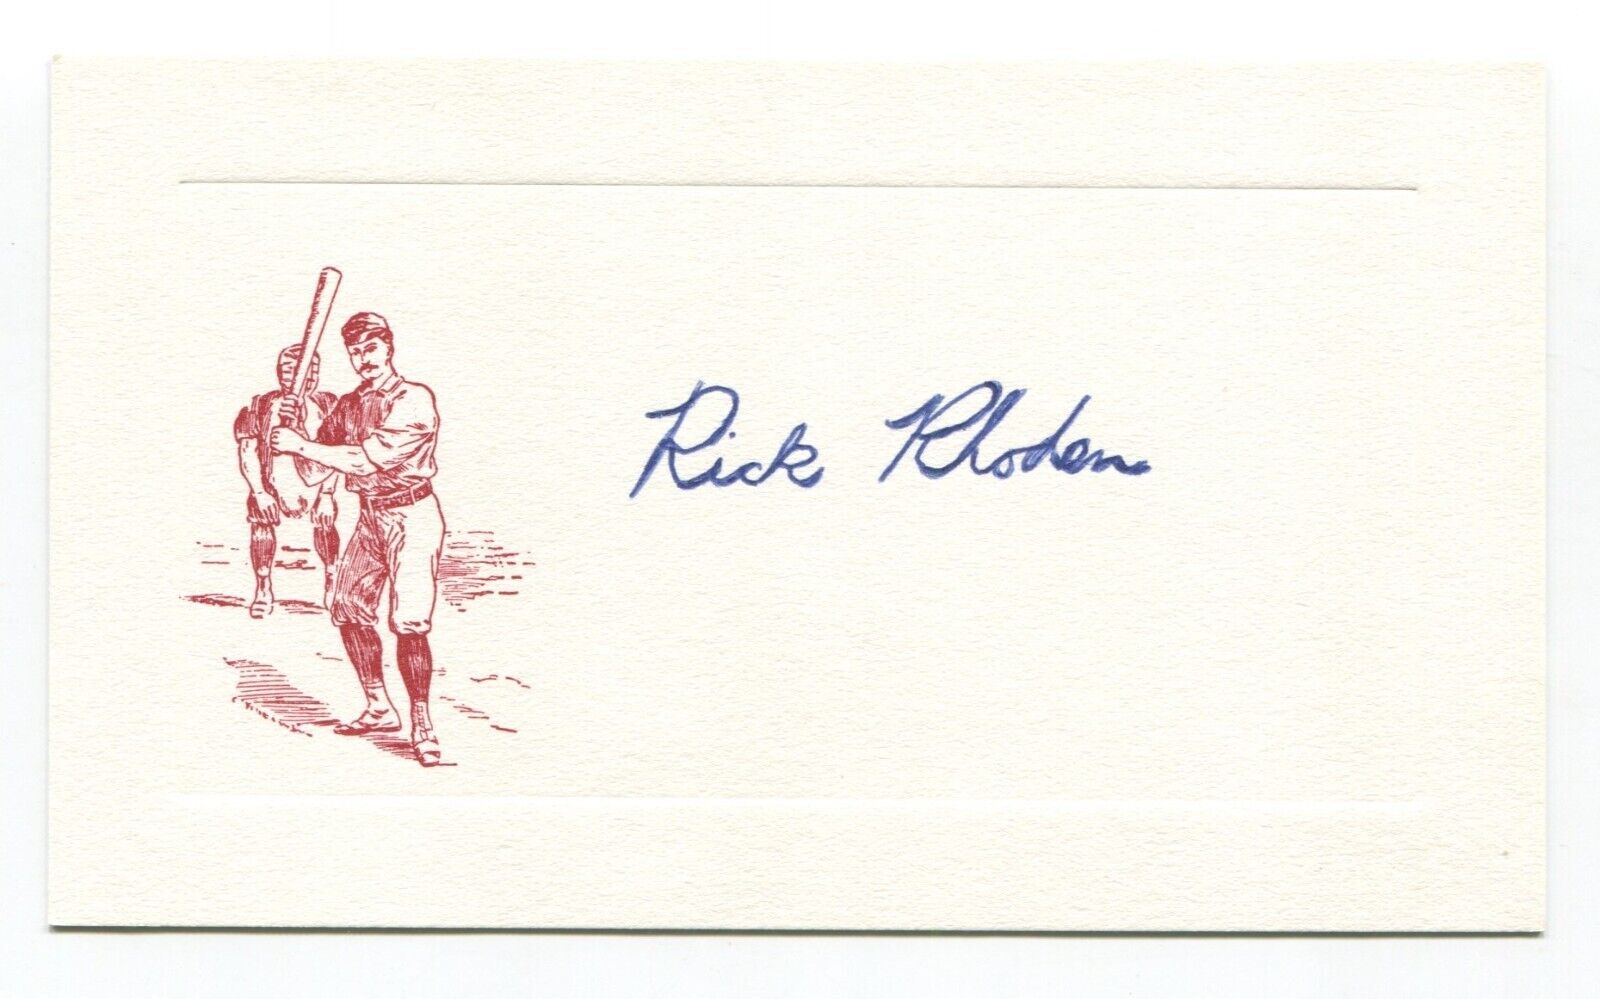 Rick Rhoden Signed Card Autograph Baseball MLB Roger Harris Collection